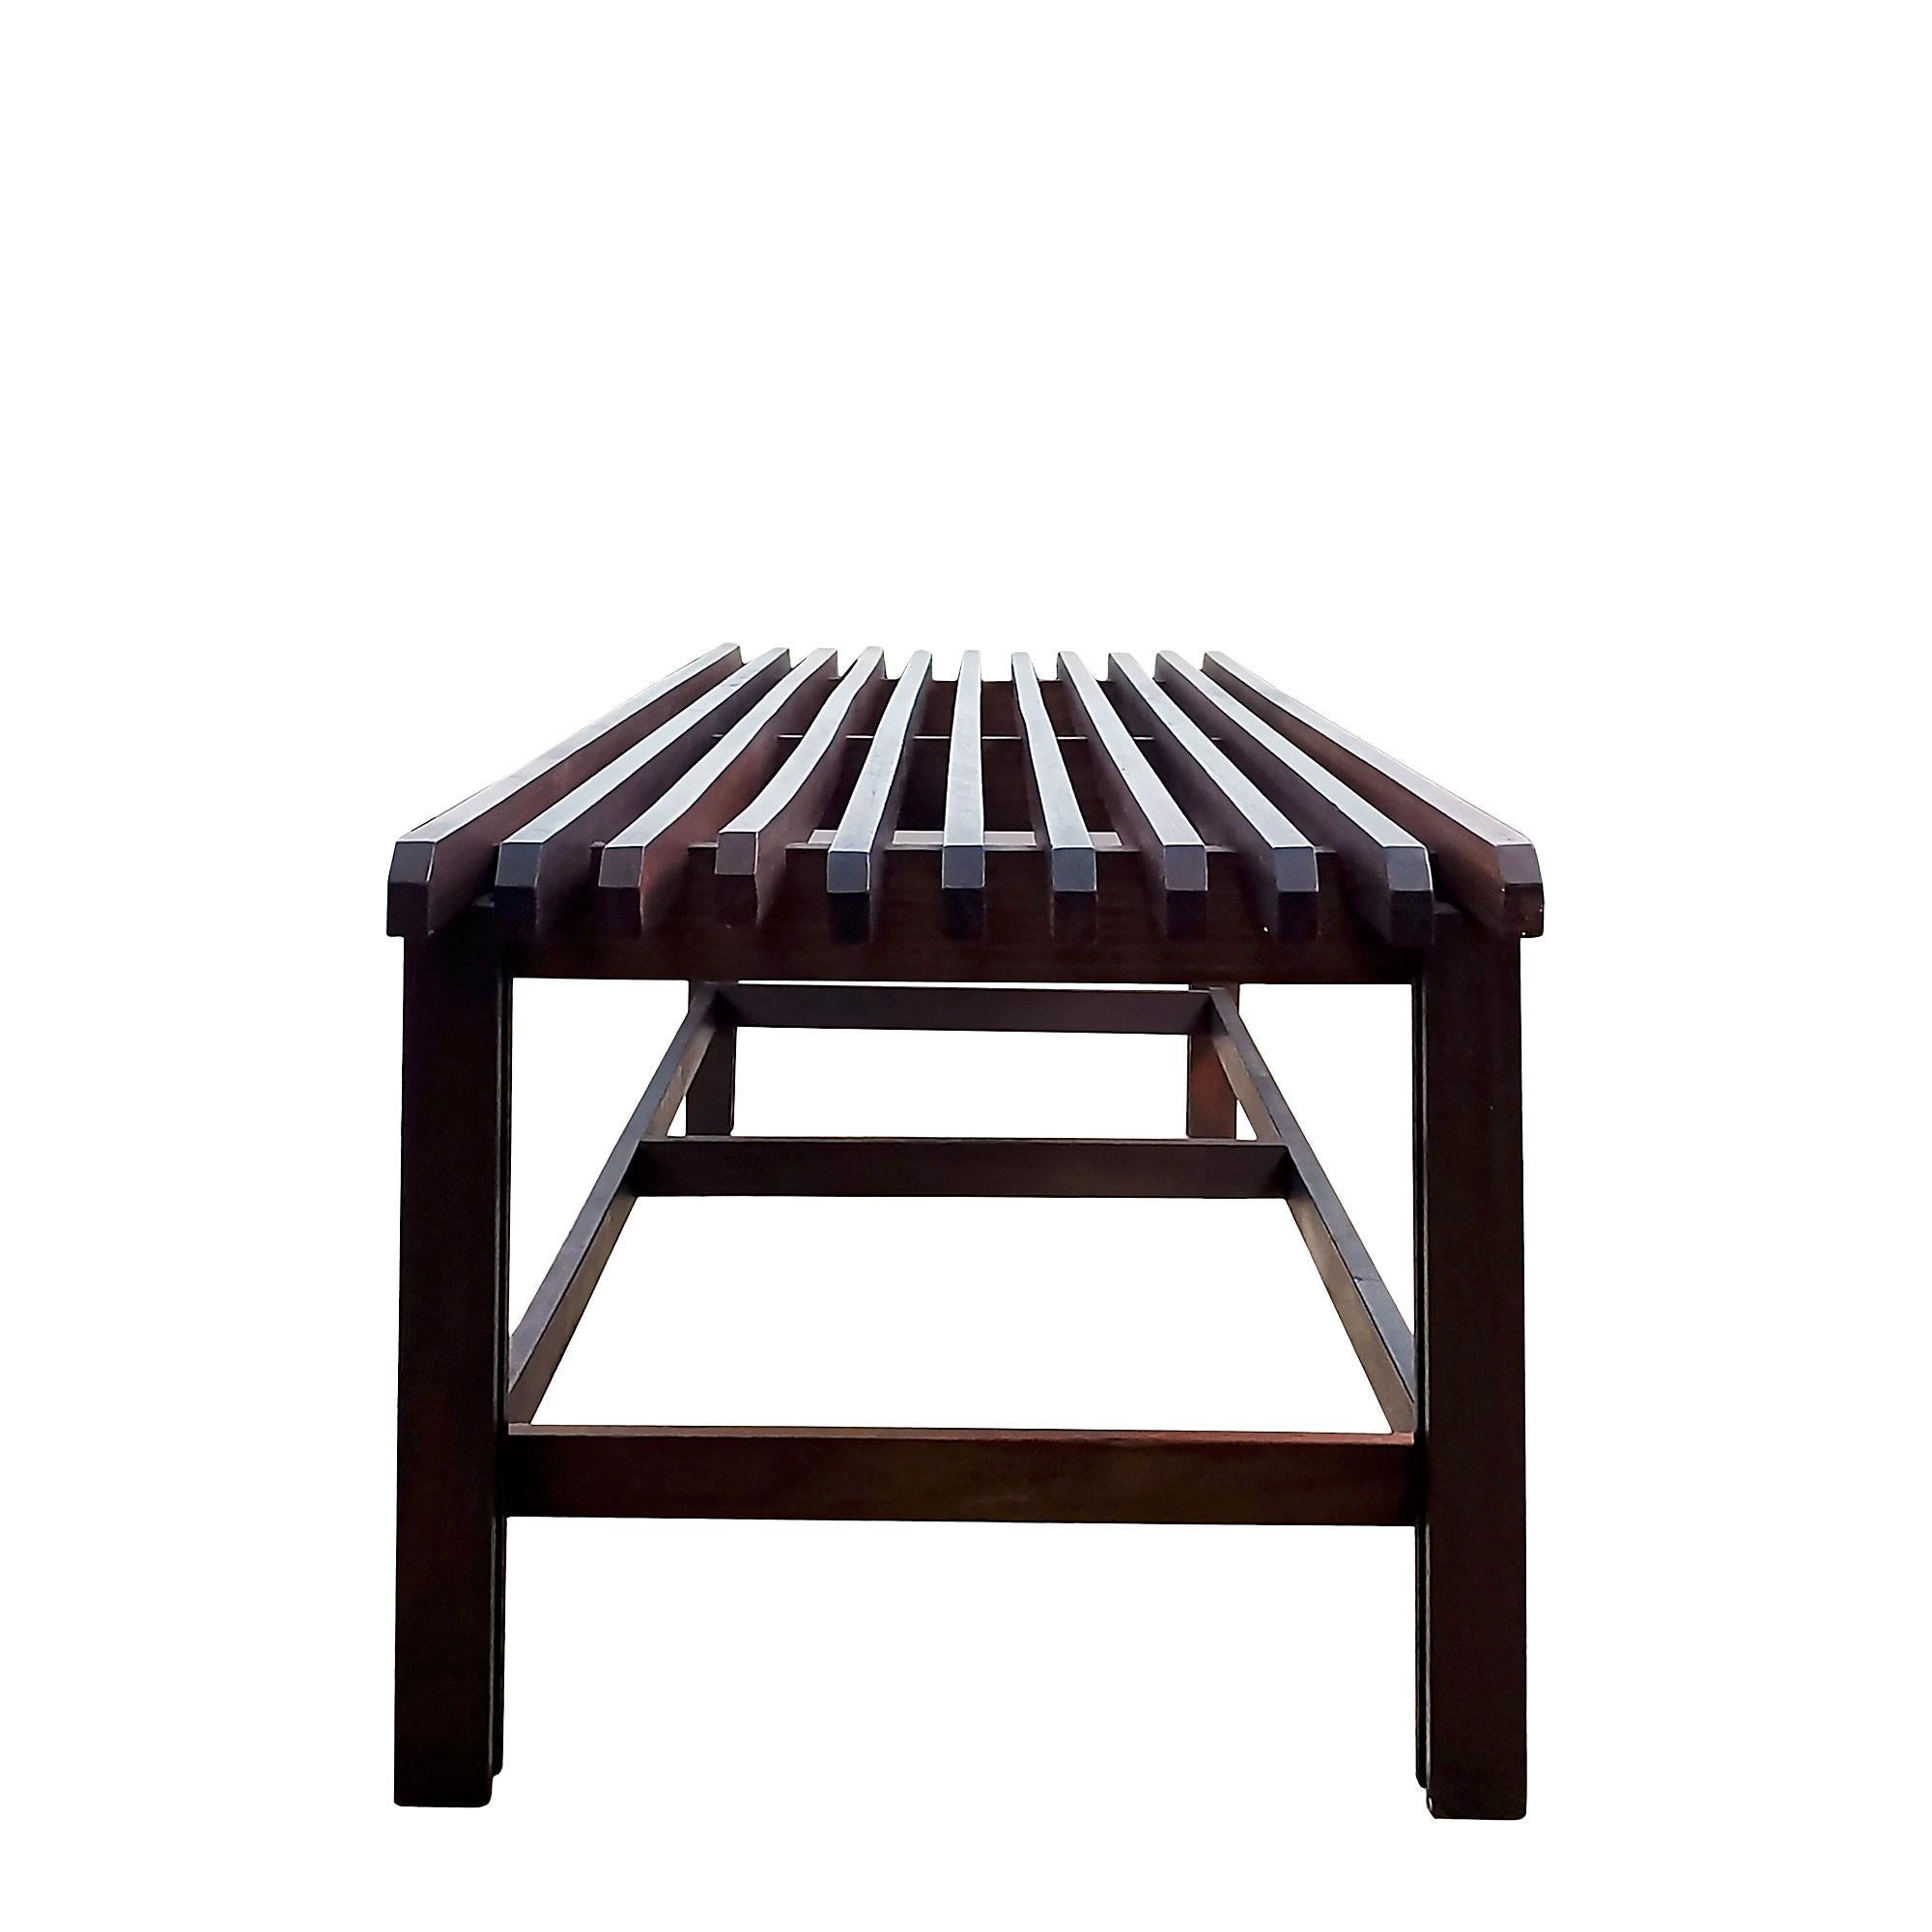 Varnished Mid-Century Modern Bench in Solid Teak Slats – Italy 1960 For Sale